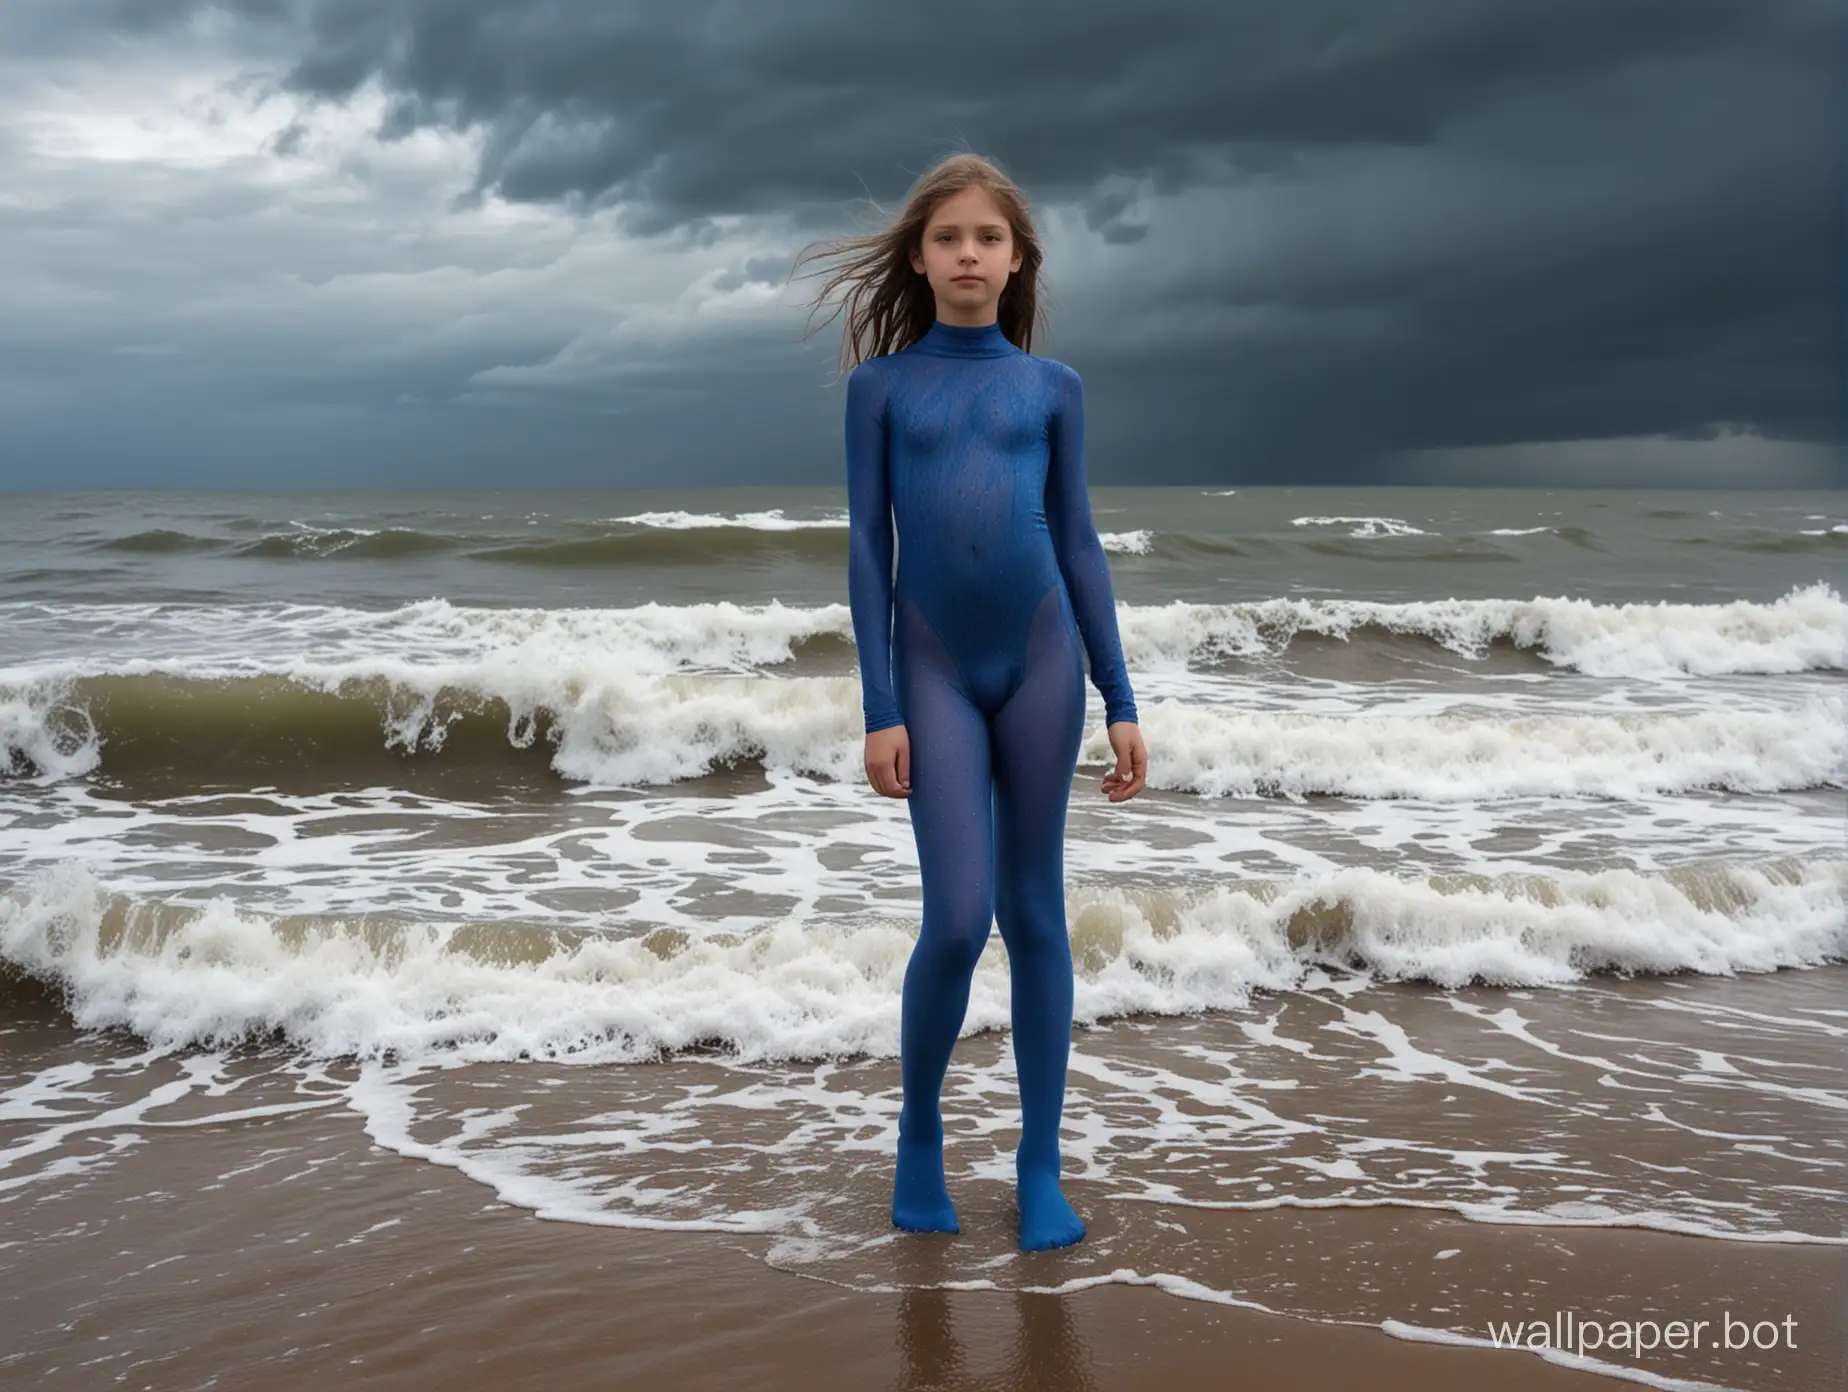 girl 11 years old in a blue bodystocking stands on the shore of a raging sea under a stormy sky